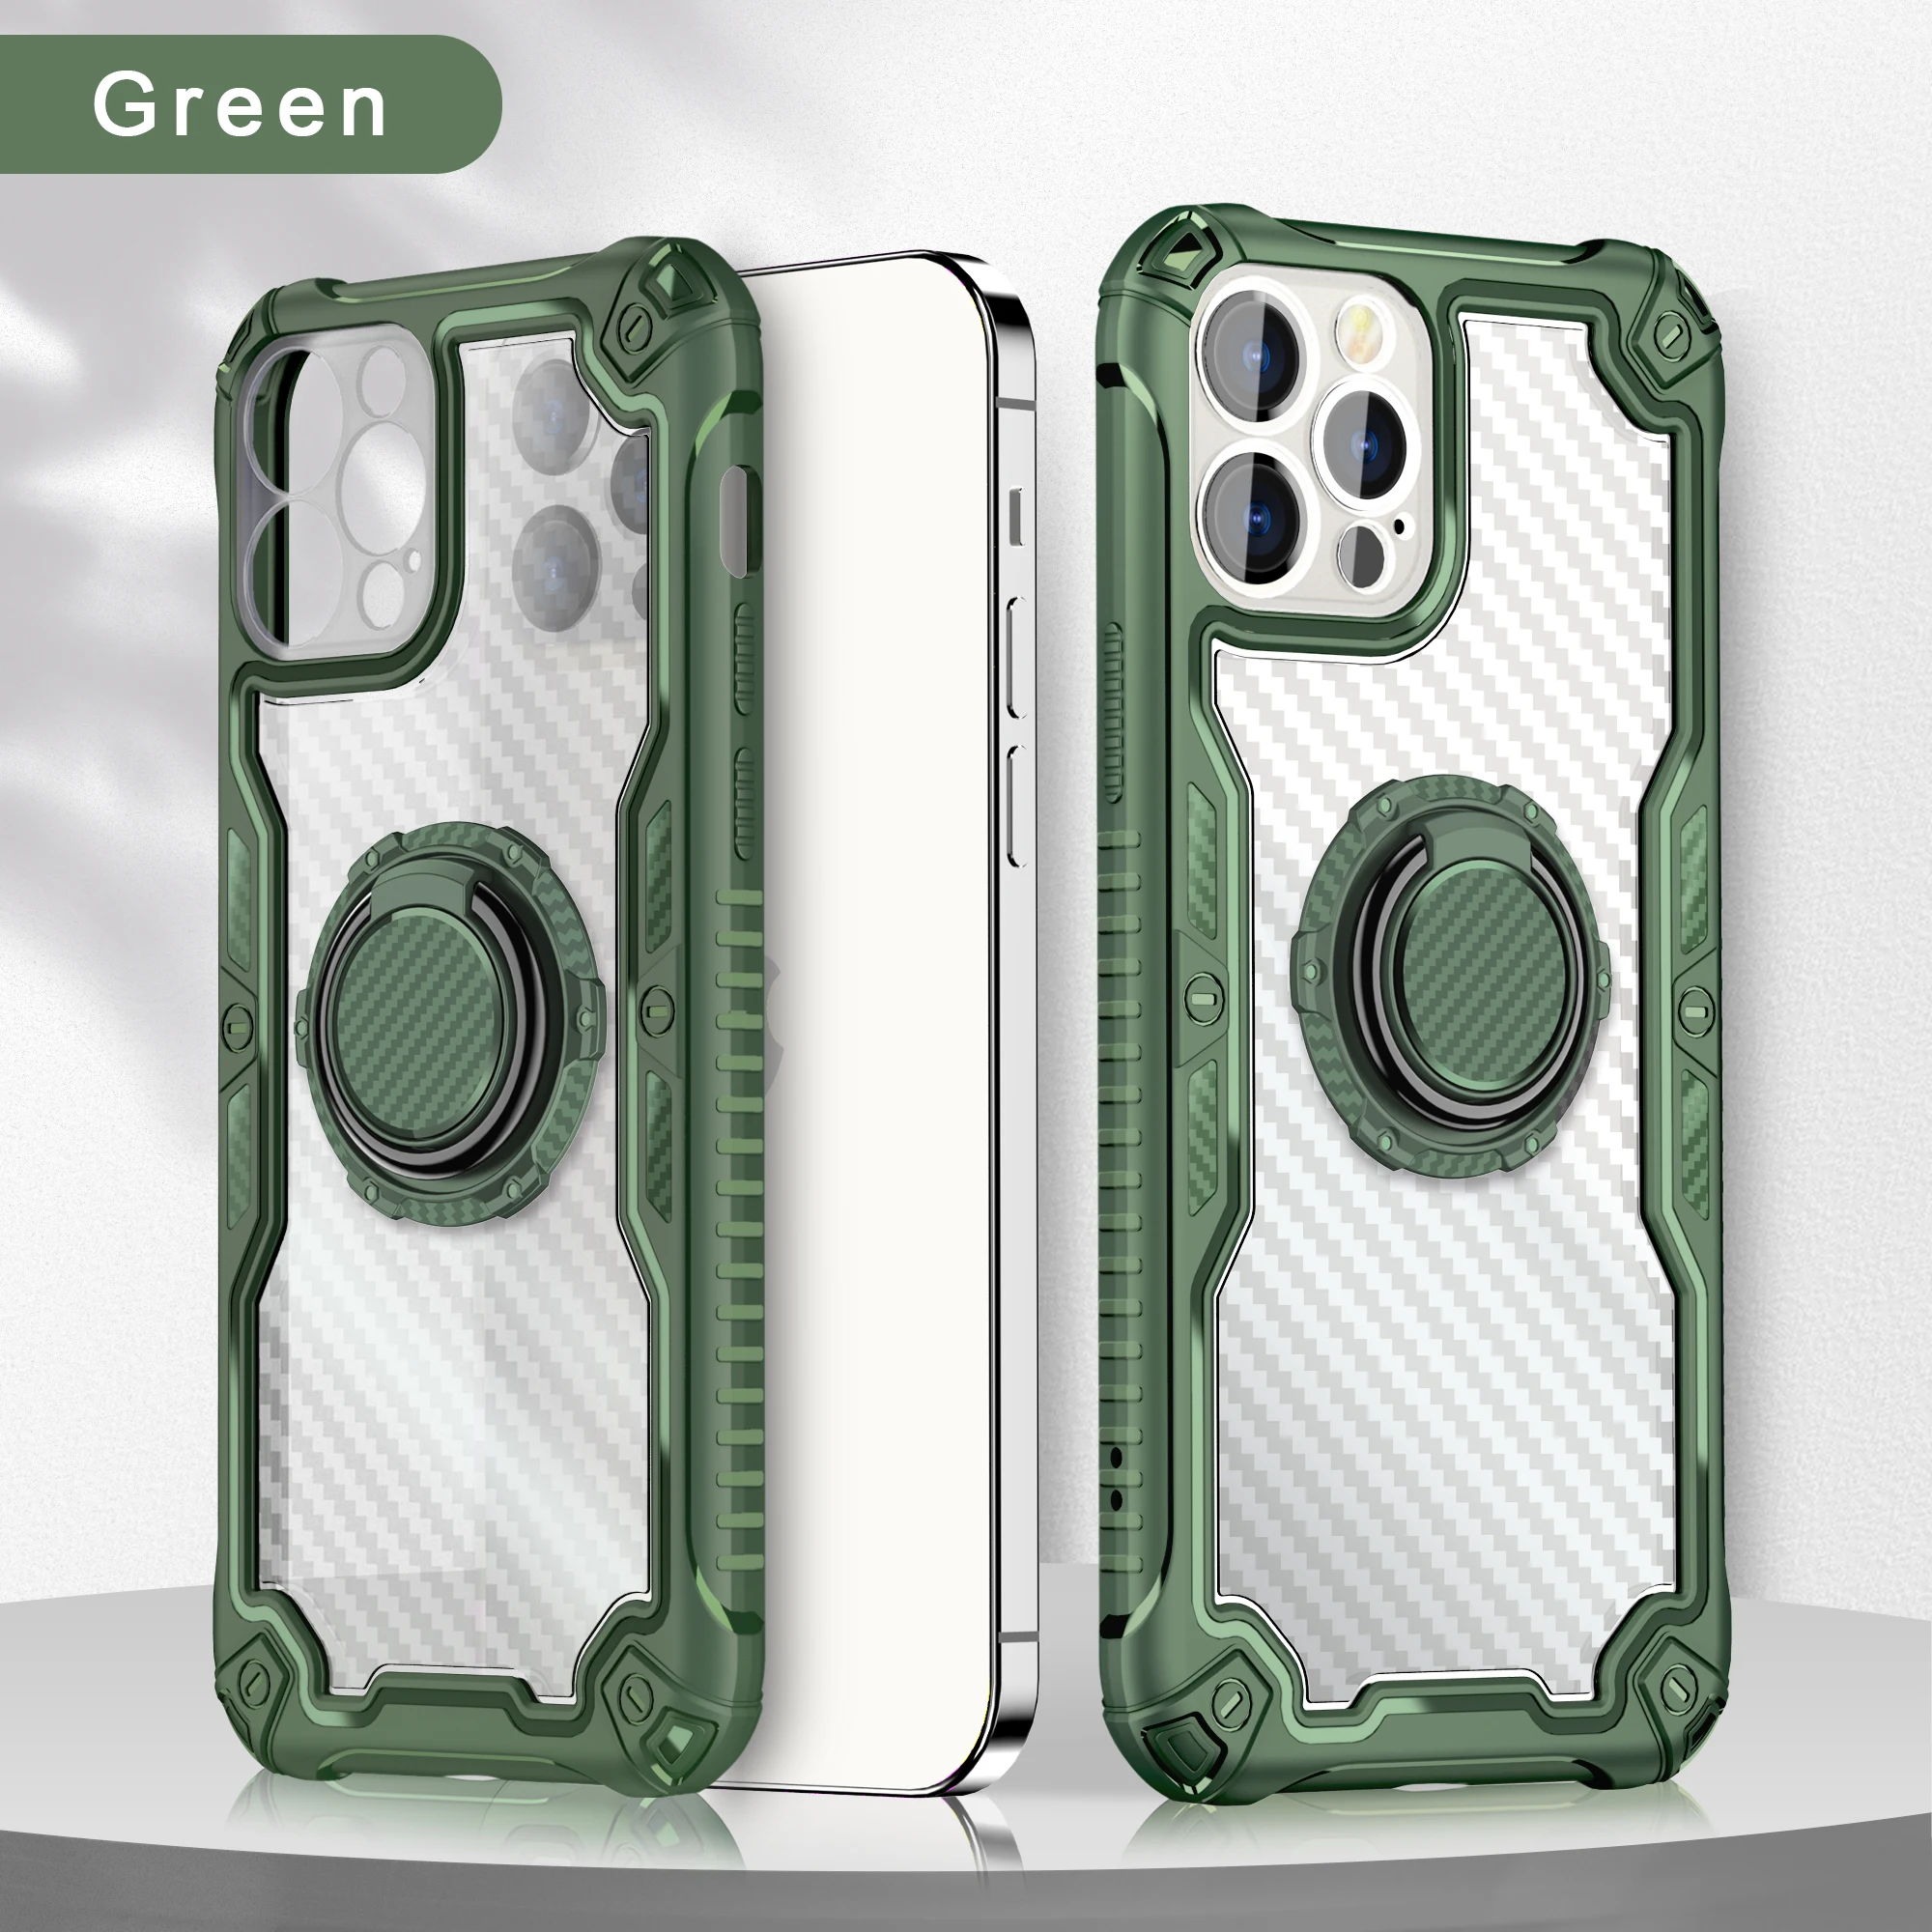 

360 Degree Rotation Magnetic Kickstand Mobile Phone Cover Transparent PC TPU Shockproof Phone Case For Iphone 12 13 Pro Max, 5 colors